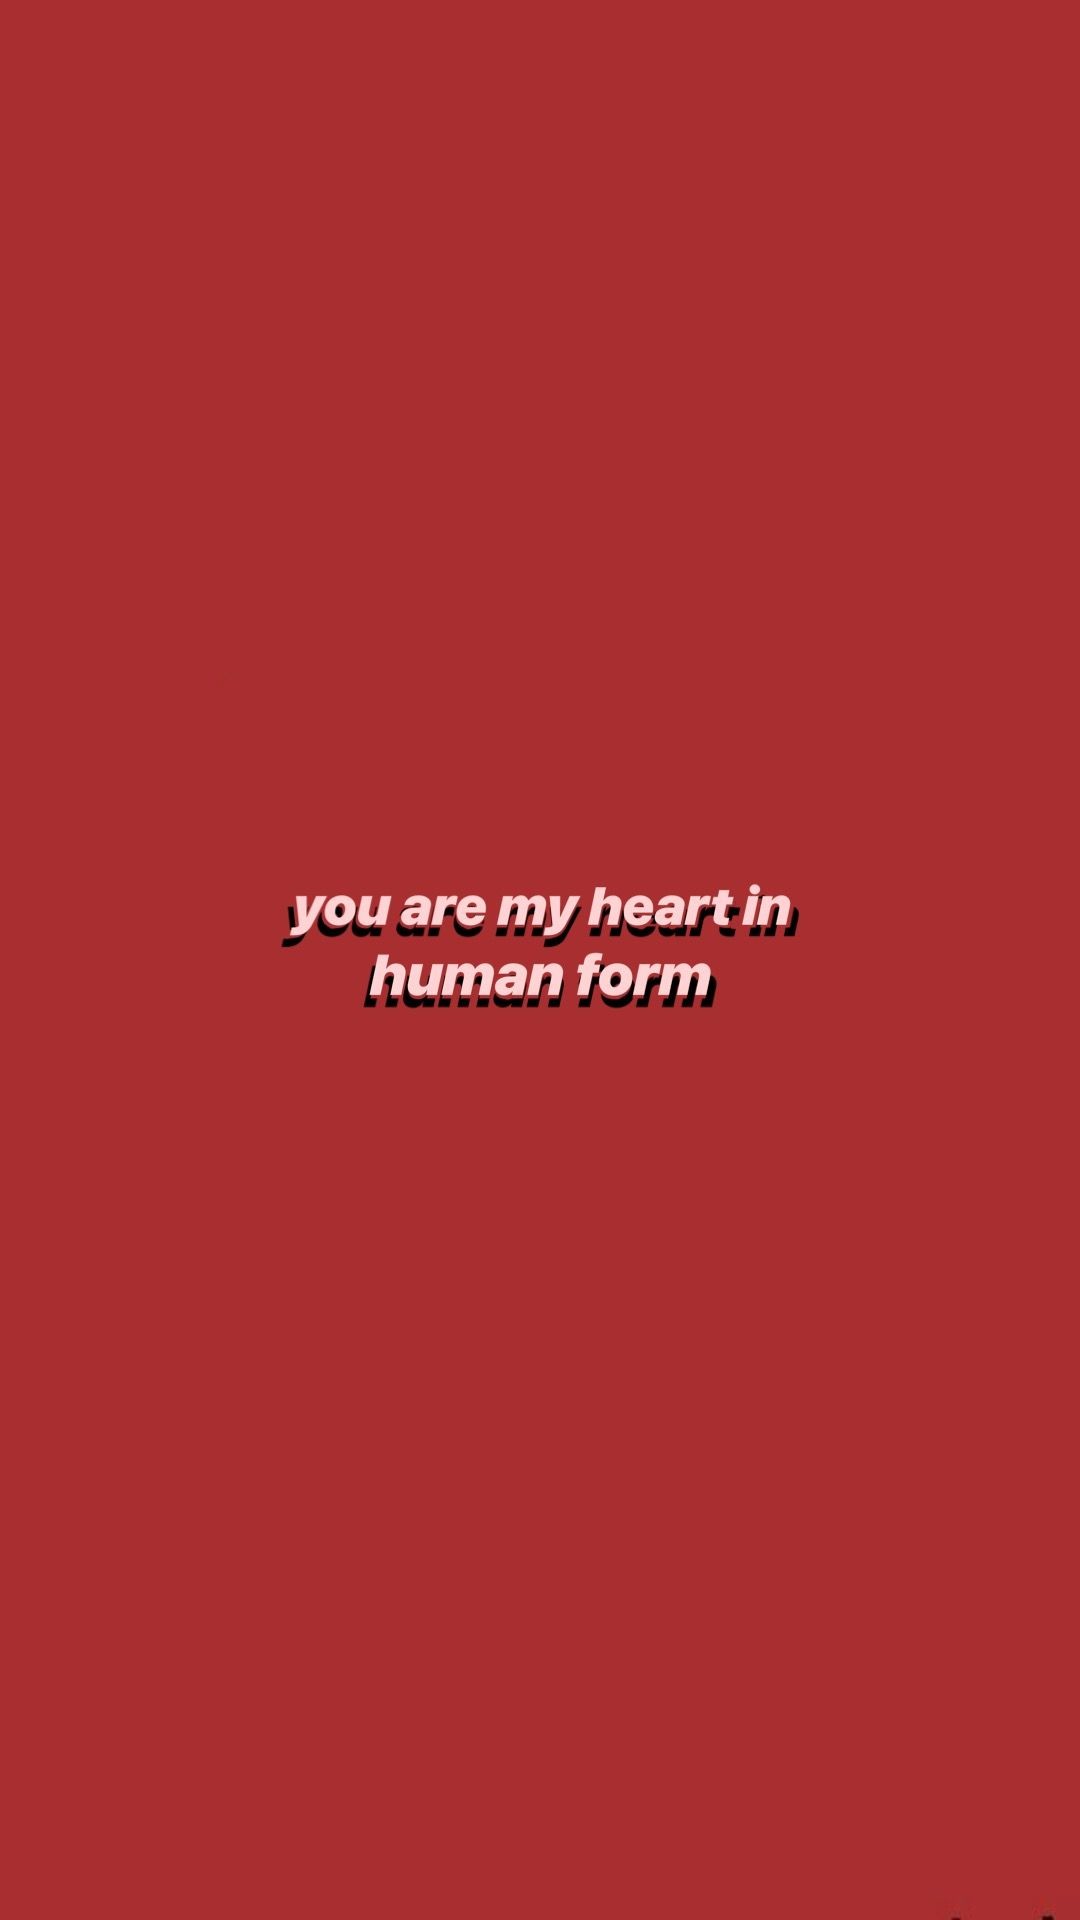 You are my heart in human form - Quotes